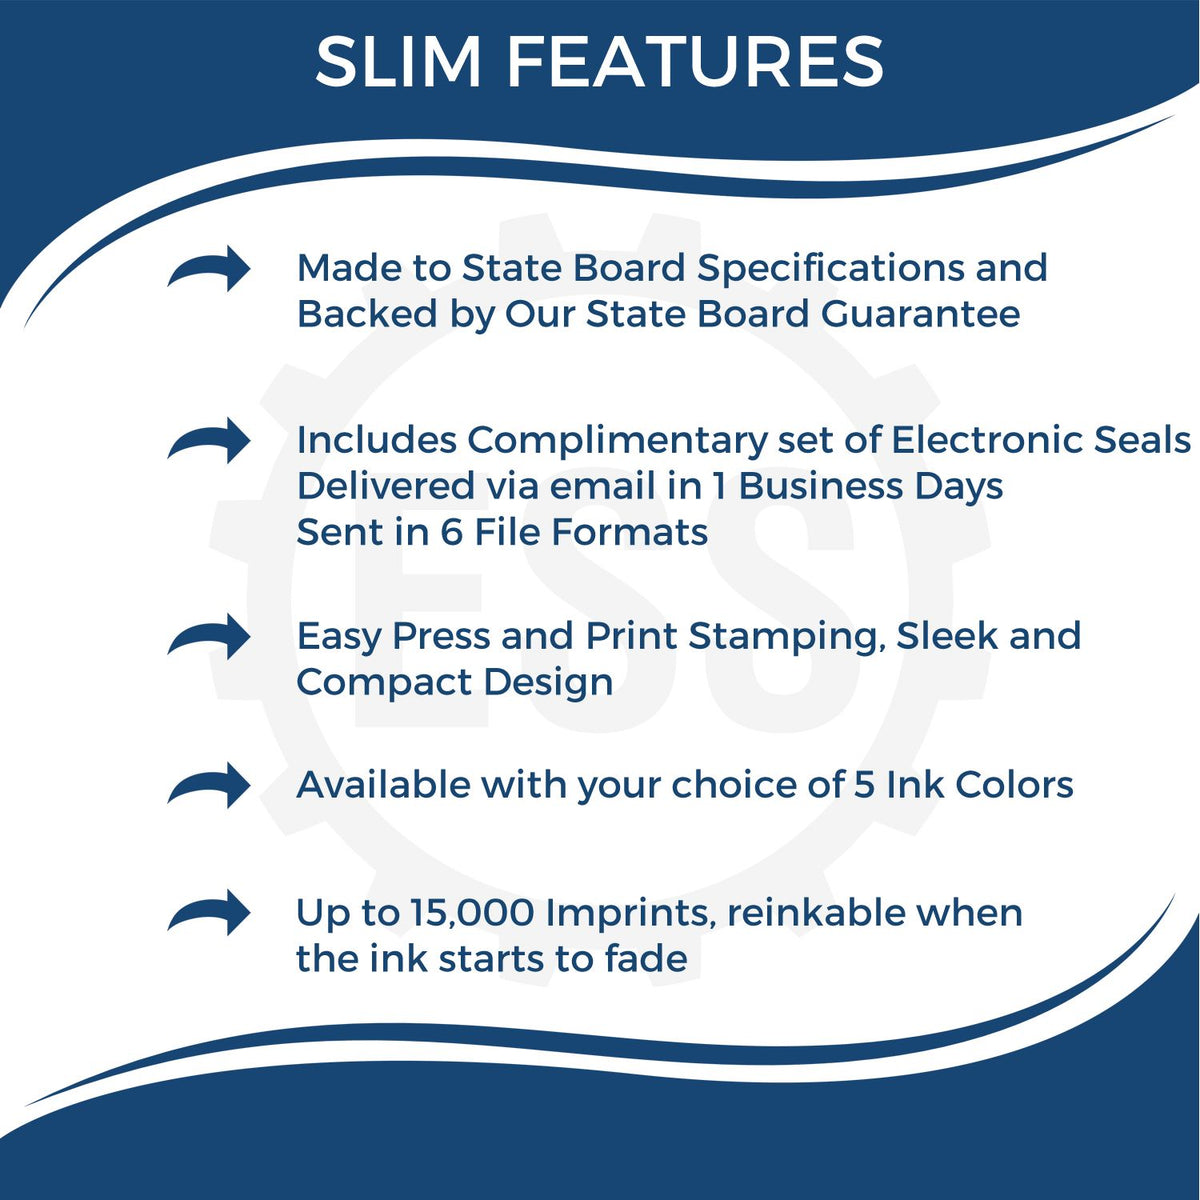 A picture of an infographic highlighting the selling points for the Super Slim Maine Notary Public Stamp